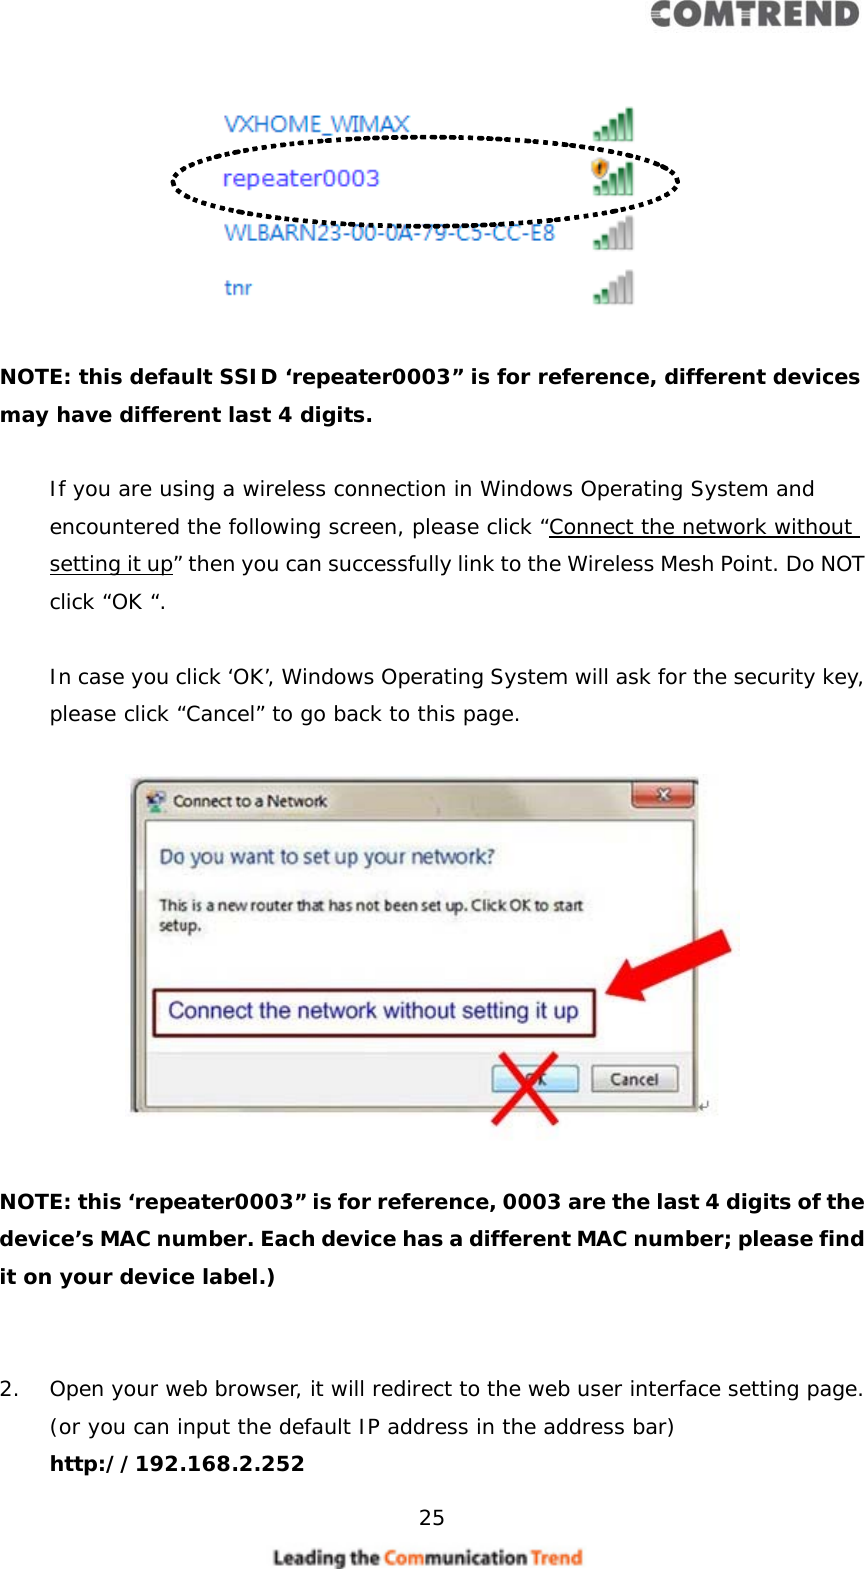     25     NOTE: this default SSID ‘repeater0003” is for reference, different devices may have different last 4 digits.  If you are using a wireless connection in Windows Operating System and encountered the following screen, please click “Connect the network without setting it up” then you can successfully link to the Wireless Mesh Point. Do NOT click “OK “.   In case you click ‘OK’, Windows Operating System will ask for the security key, please click “Cancel” to go back to this page.    NOTE: this ‘repeater0003” is for reference, 0003 are the last 4 digits of the device’s MAC number. Each device has a different MAC number; please find it on your device label.)    2. Open your web browser, it will redirect to the web user interface setting page. (or you can input the default IP address in the address bar) http://192.168.2.252 